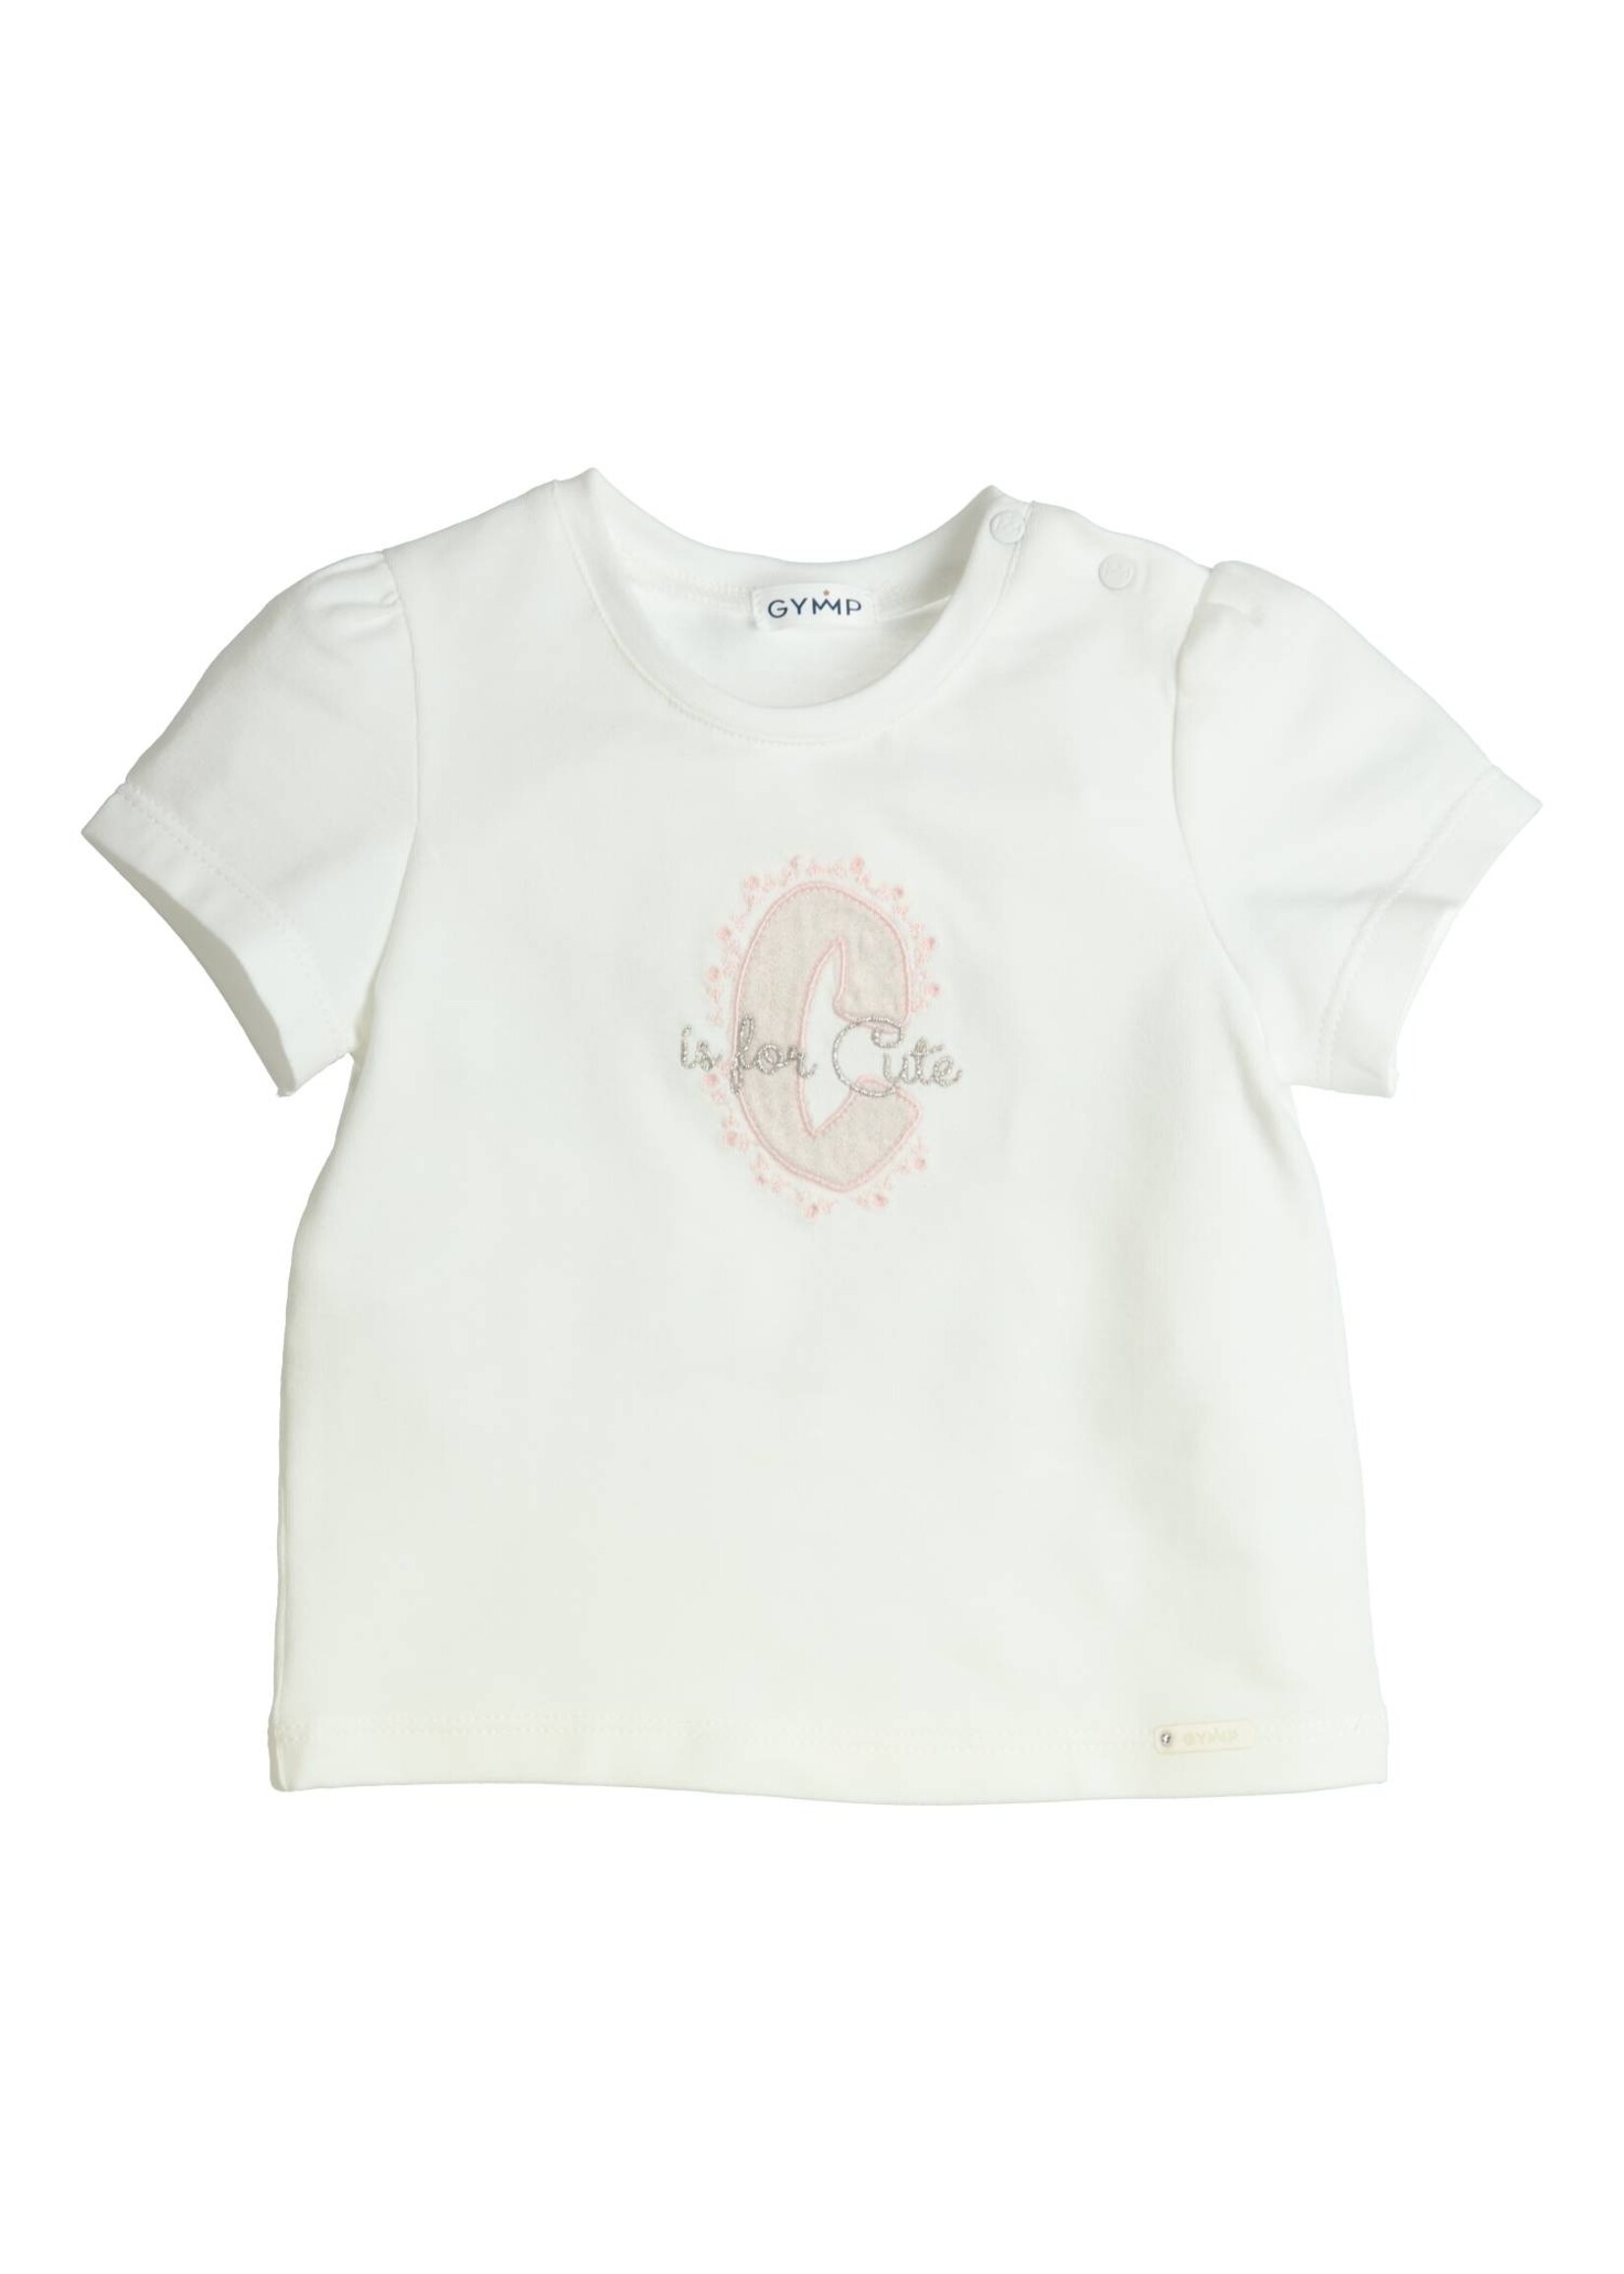 Gymp Girls T-shirt Aerobic C is for Cute 353-4295-10 Off White